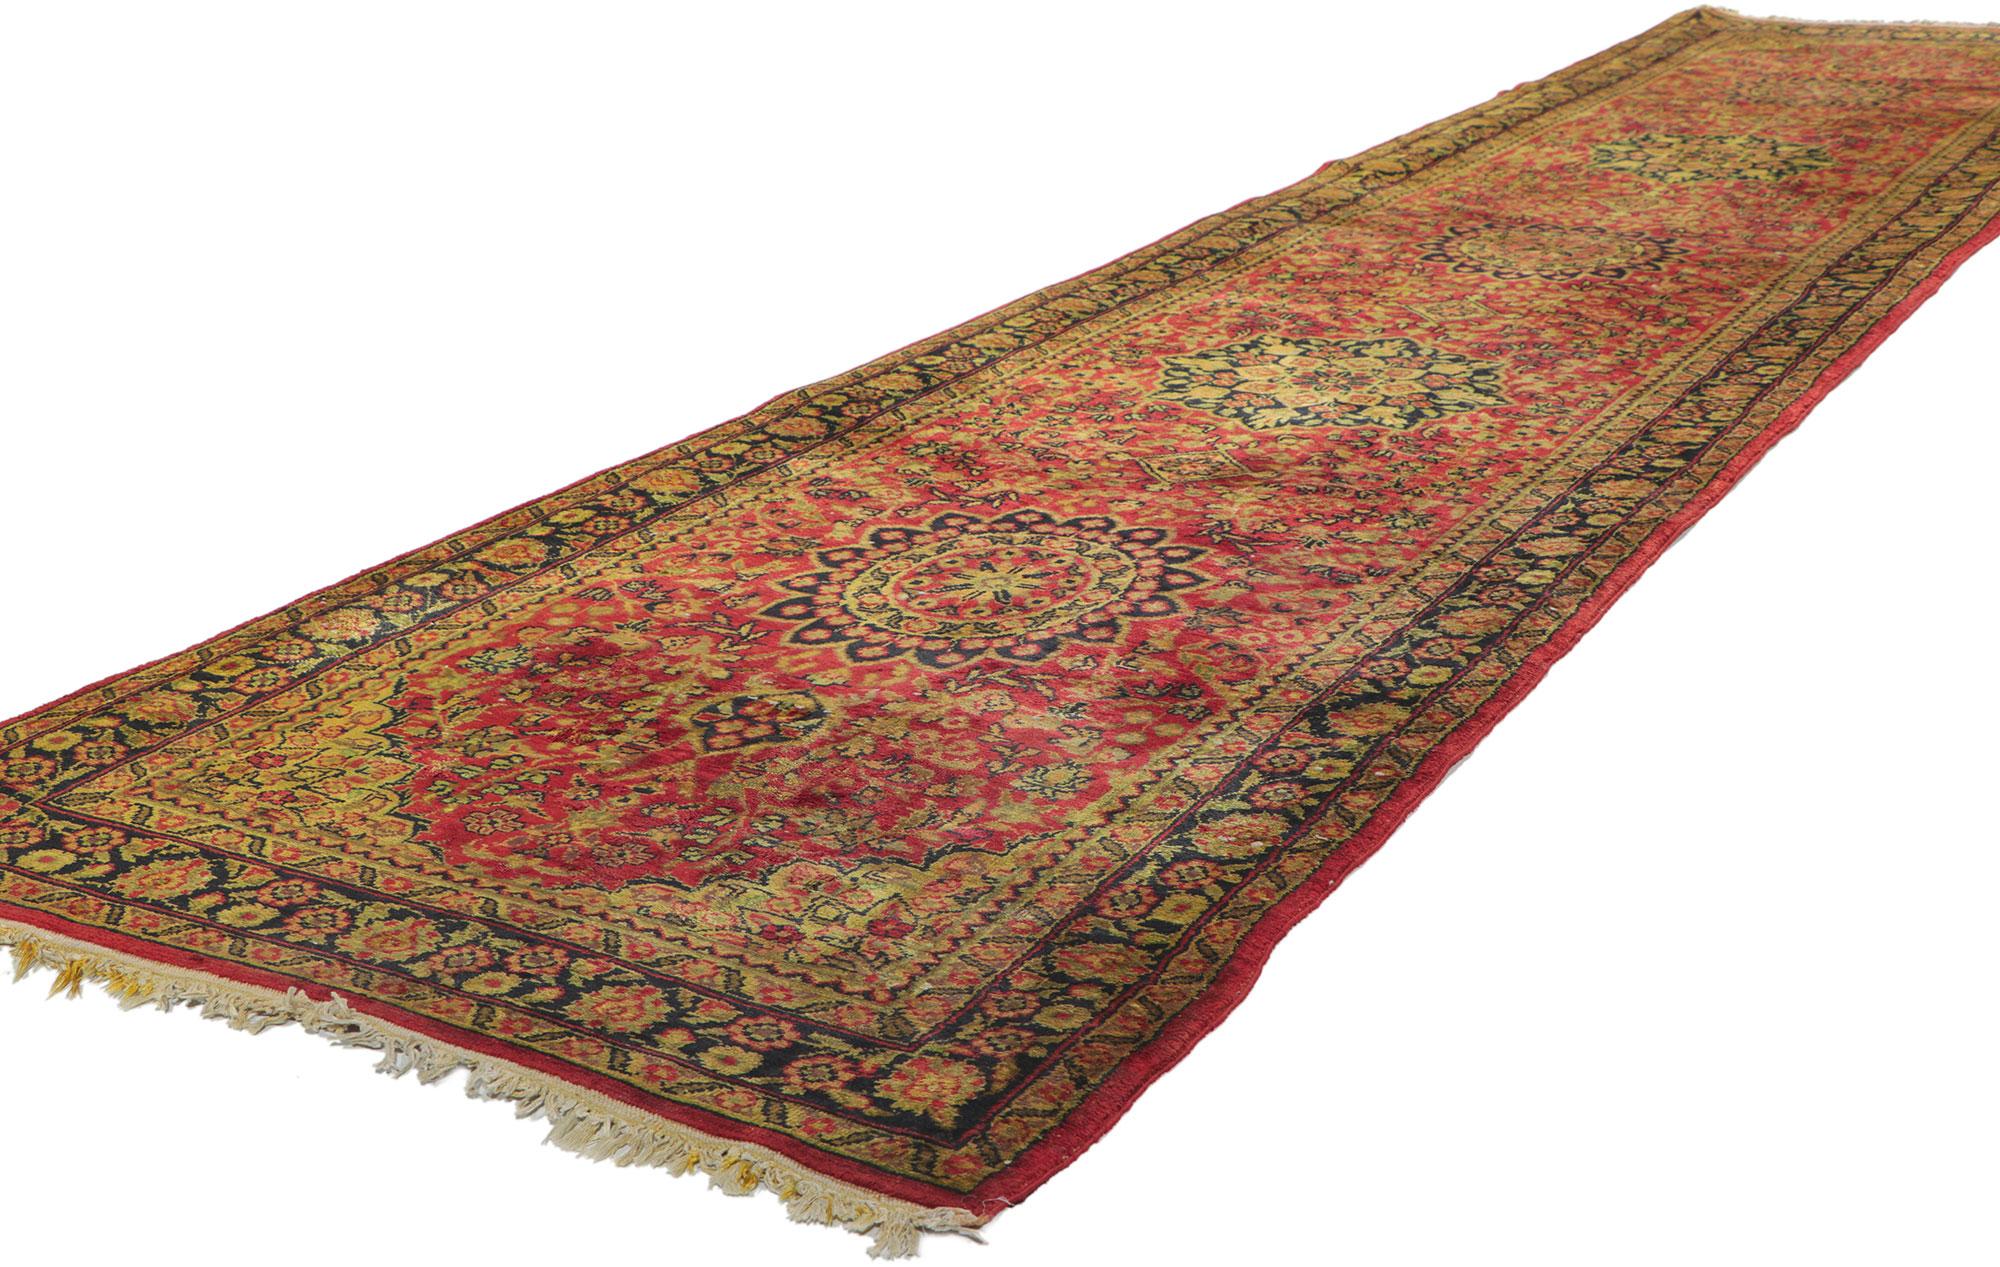 78346 Vintage Turkish Runner, 02'06 x 11'07.
This exquisite hand-knotted wool vintage Turkish runner exudes elegance and sophistication with its warm, rich colors and intricate detailing. Its well-balanced design is poised to leave a lasting